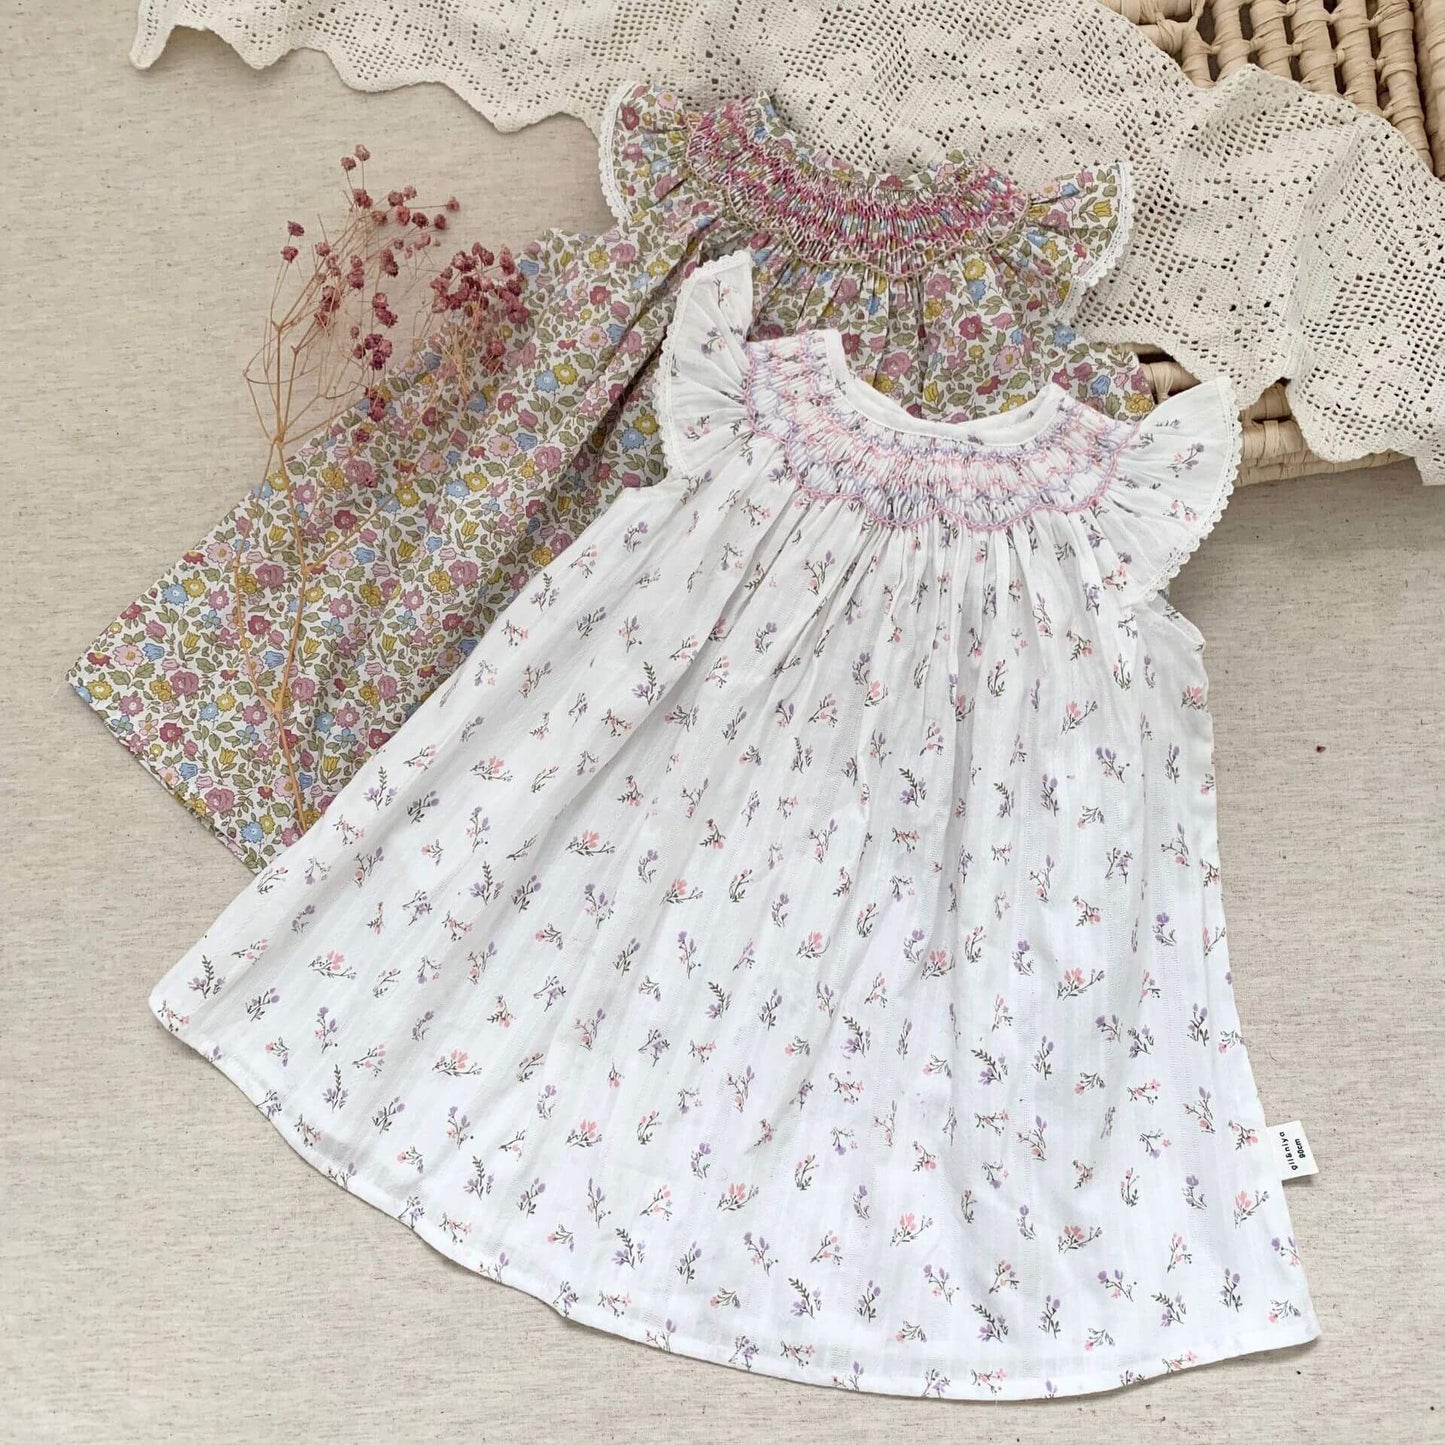 Cute Smocked Bishops,White/Floral,2T to 6T.